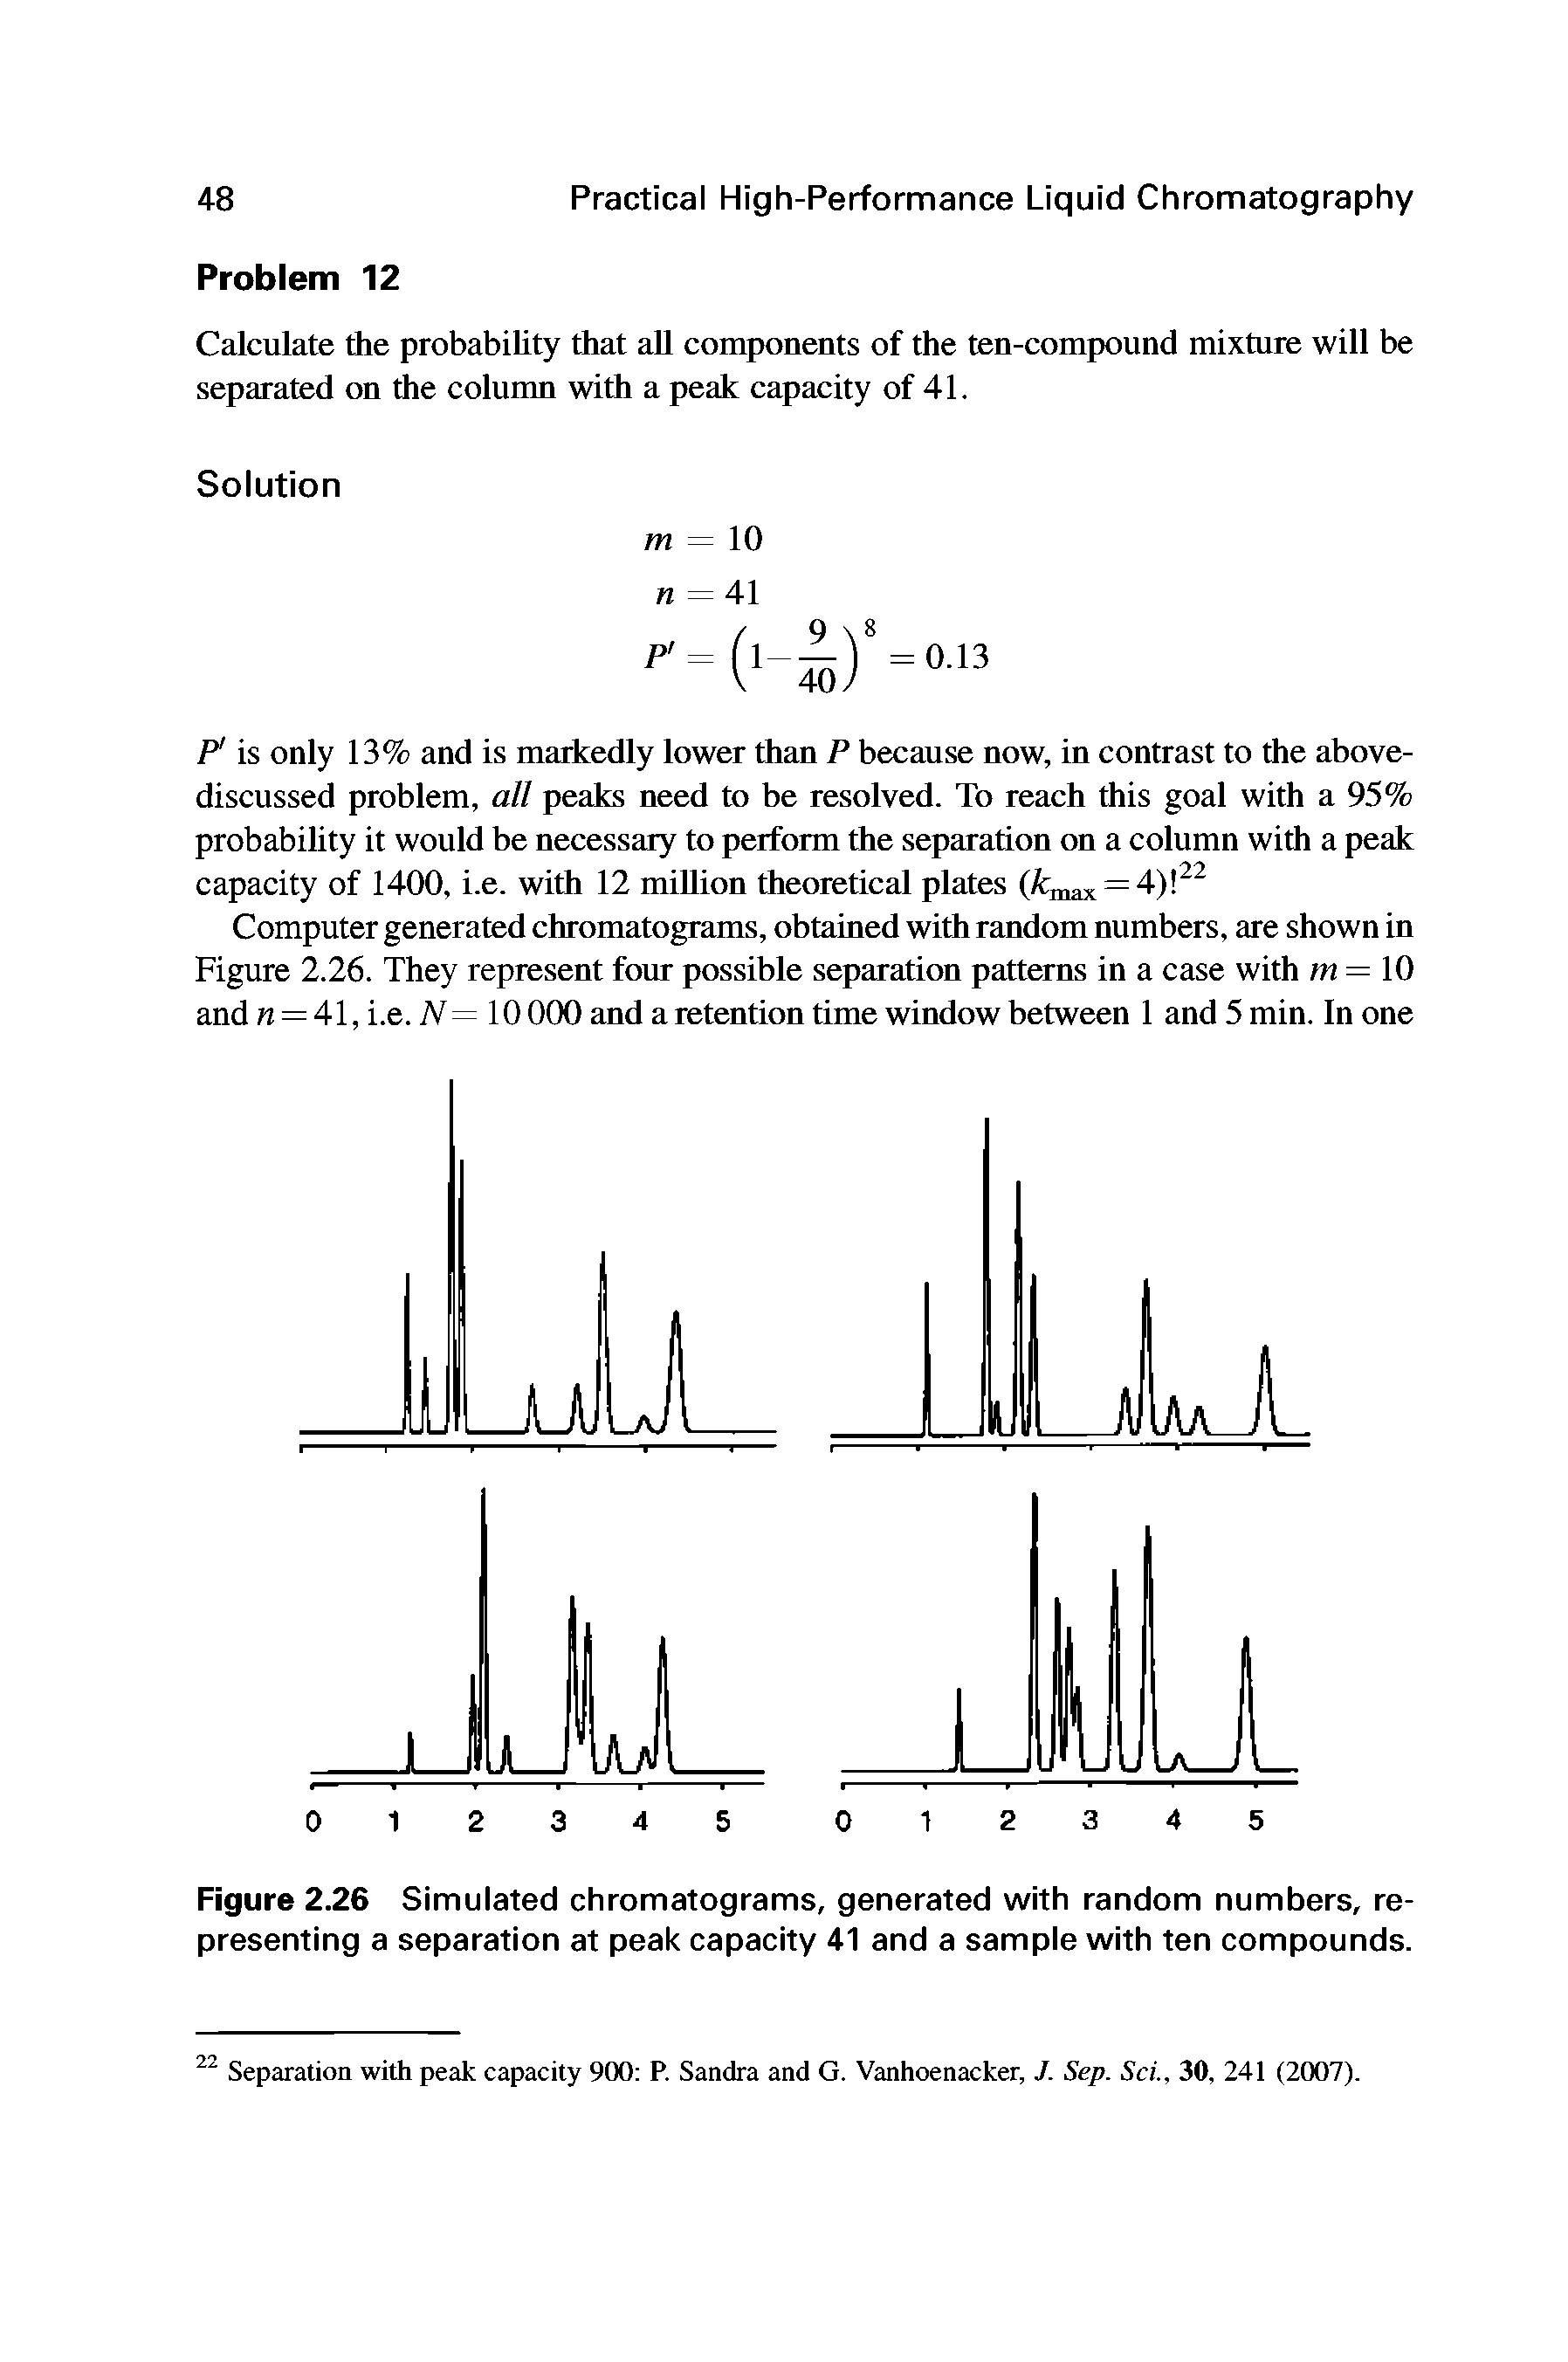 Figure 2.26 Simulated chromatograms, generated with random numbers, representing a separation at peak capacity 41 and a sample with ten compounds.